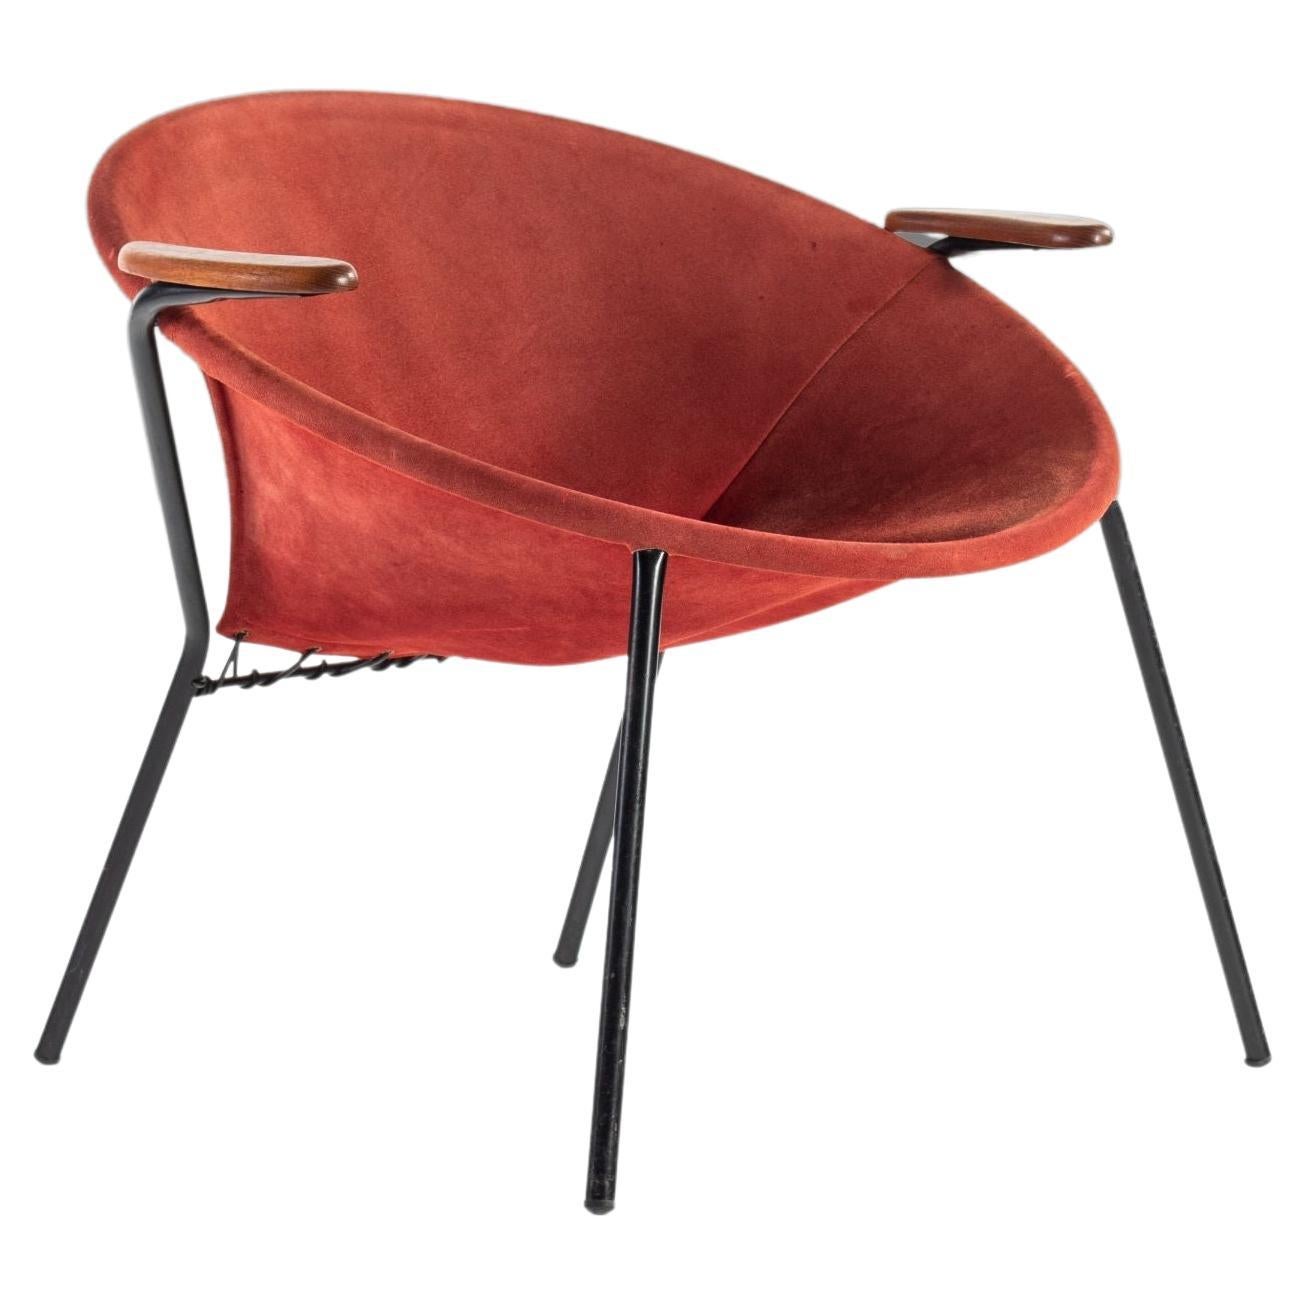 Mid Century Balloon / Hoop Chair in Red Dyed Suede by Hans Olsen, Denmark, 1960s For Sale